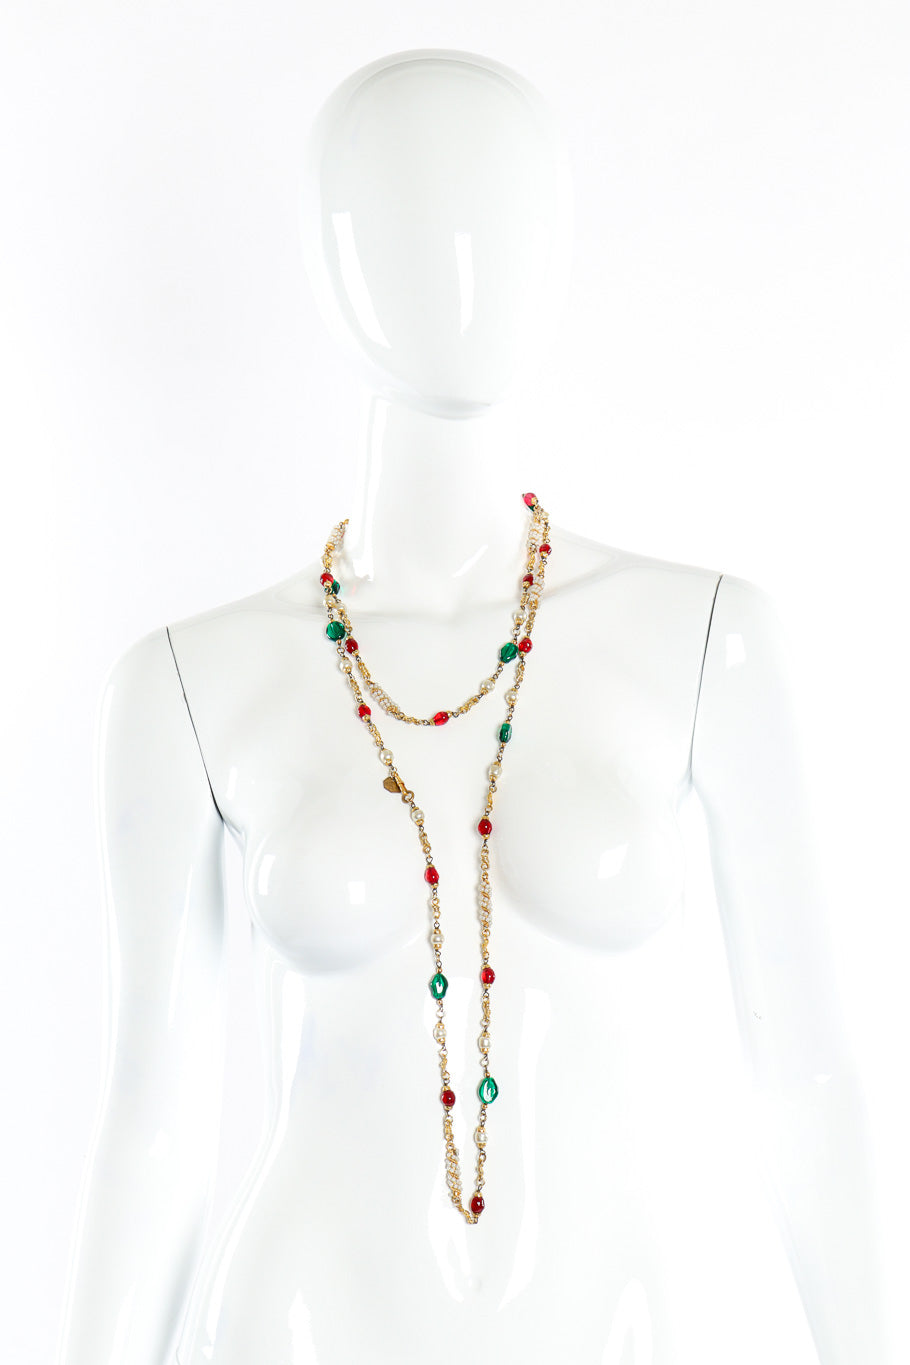 Chanel 01A 2001 Byzantine Cross Gripoix Poured Glass Coloured Stone Necklace  with Faux Pearls